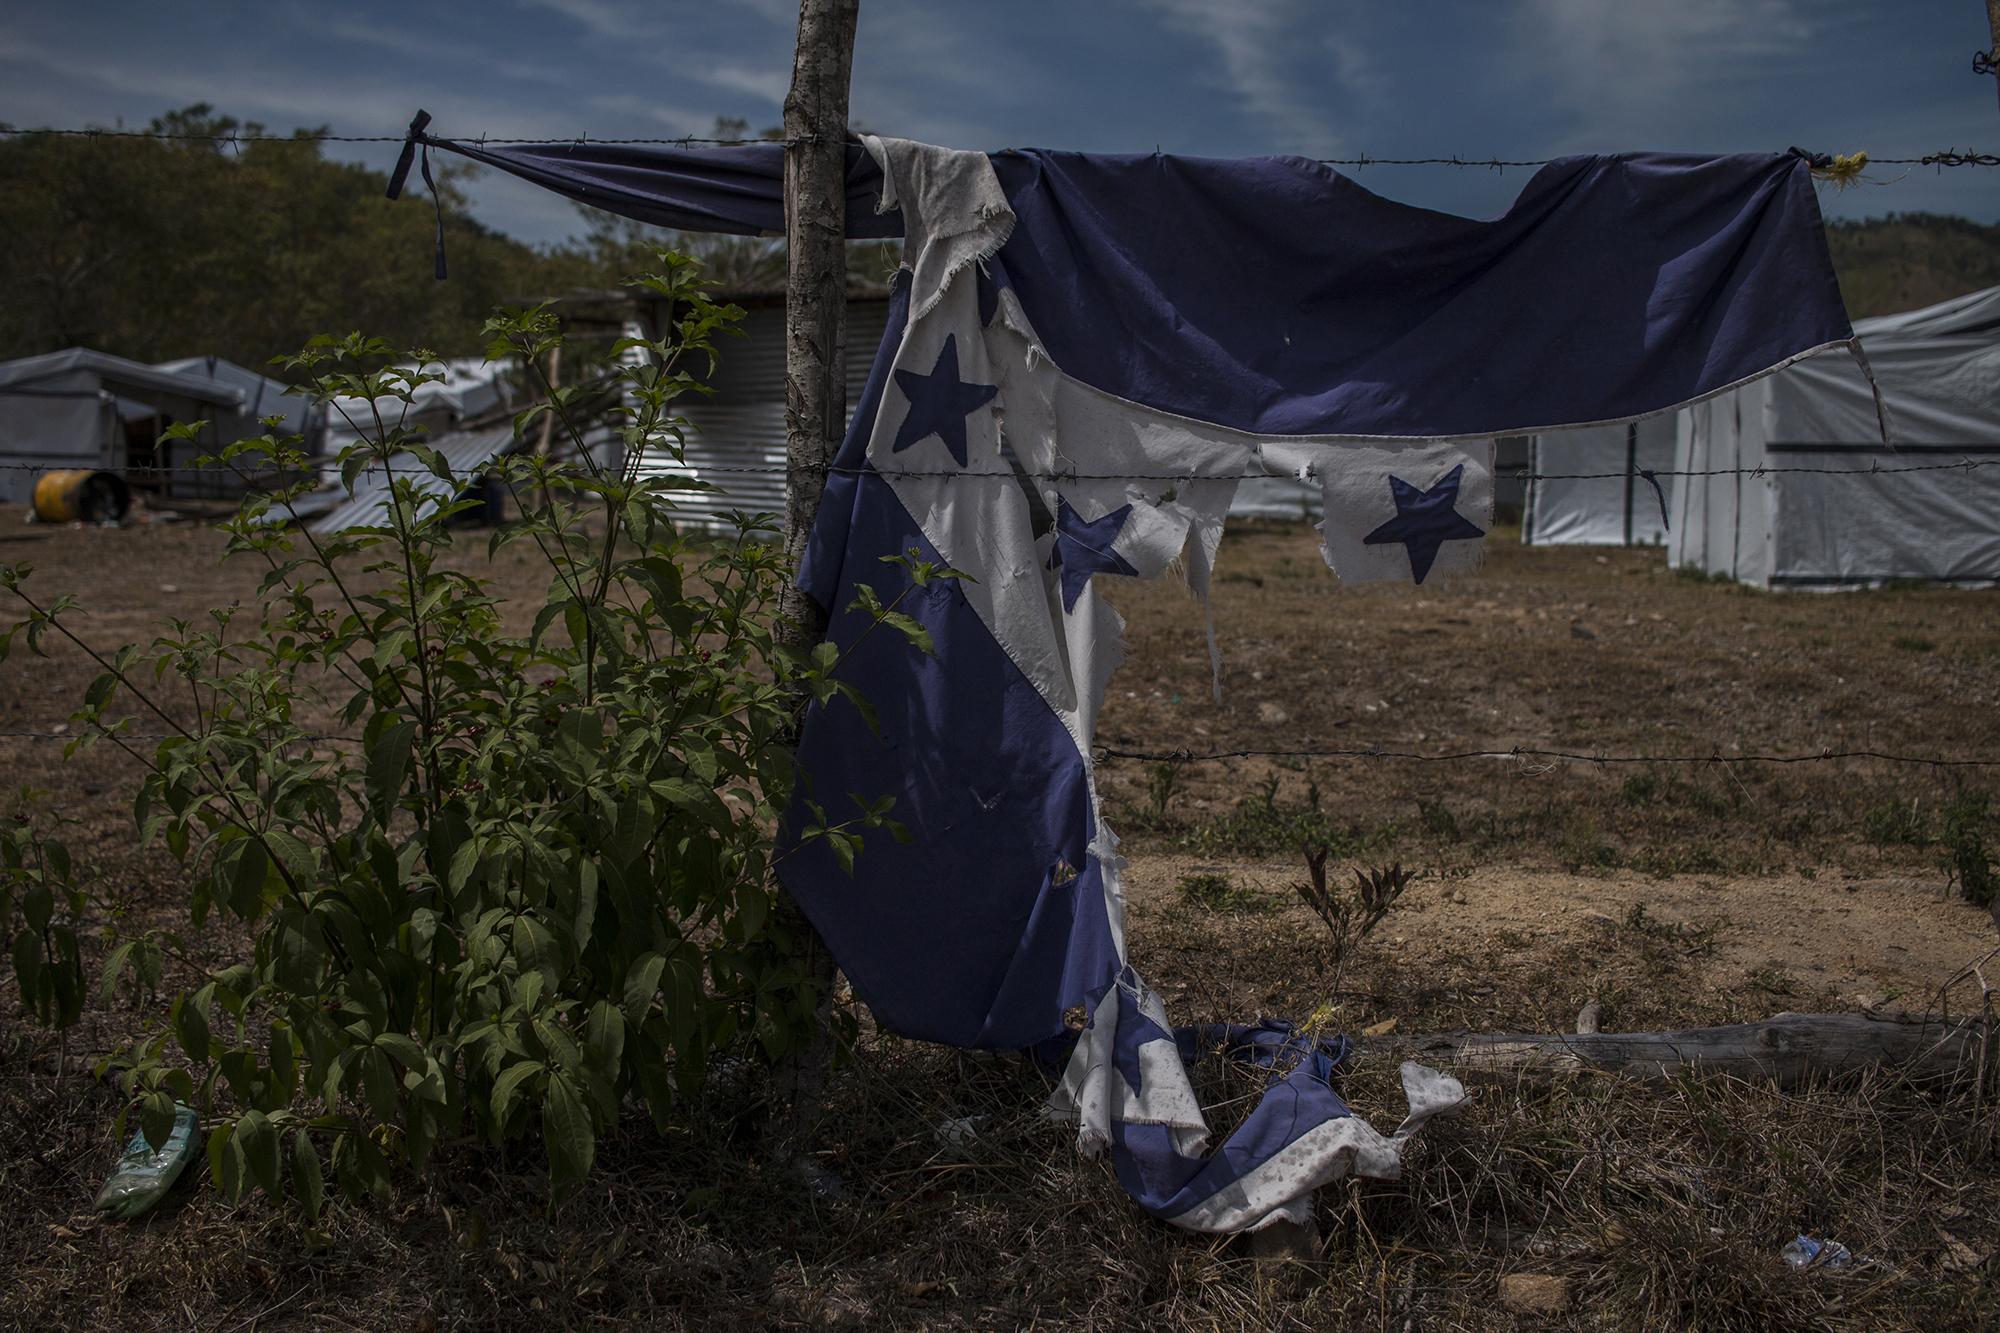 A desolate community sits along the highway to Trujillo, a monument to the deep political crisis shaping Honduras in the last eight years under Juan Orlando Hernández. Photo: Víctor Peña/El Faro